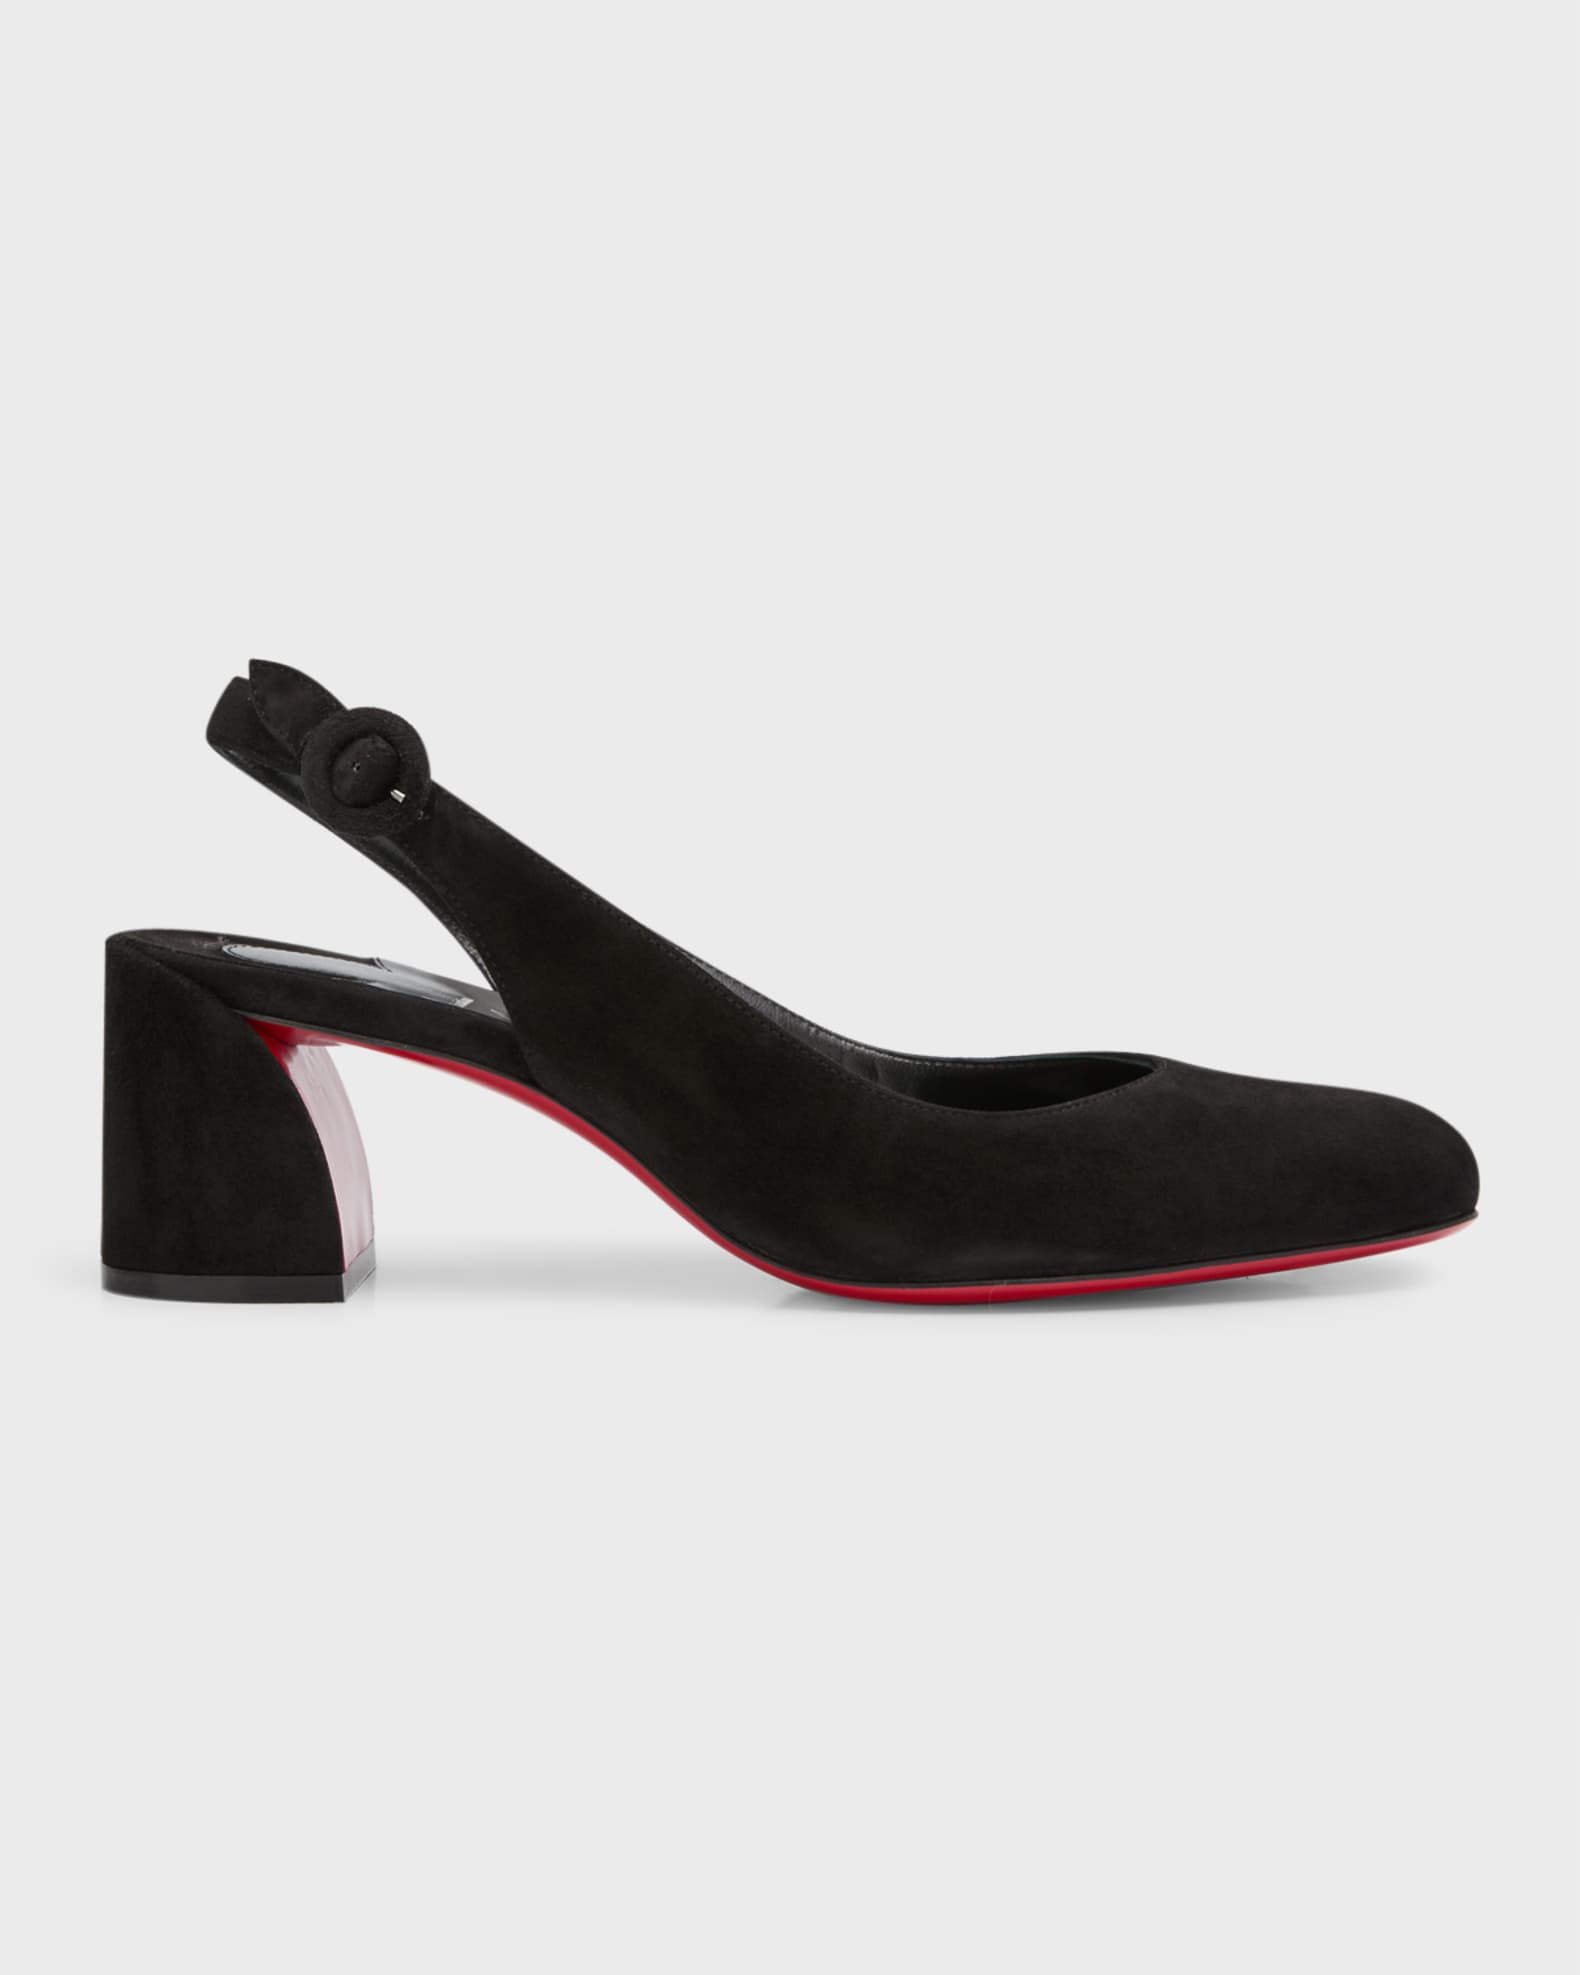 Black Red Slingback High Heels Pumps Red Bottom Shoes for Women